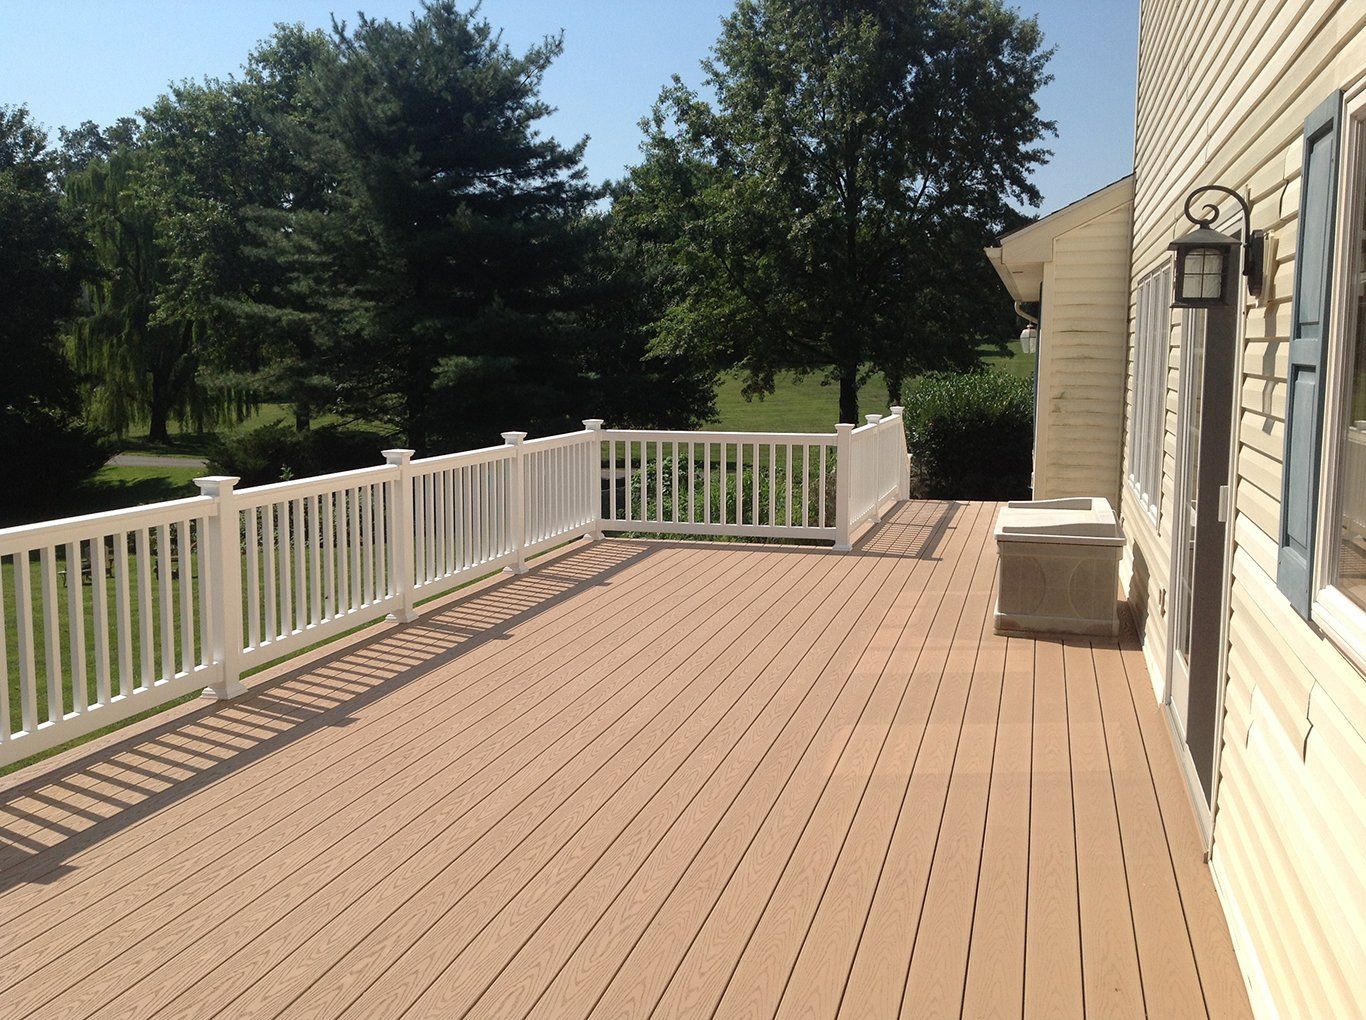 Terrace View - Home Improvement Services in Glen Arm, MD